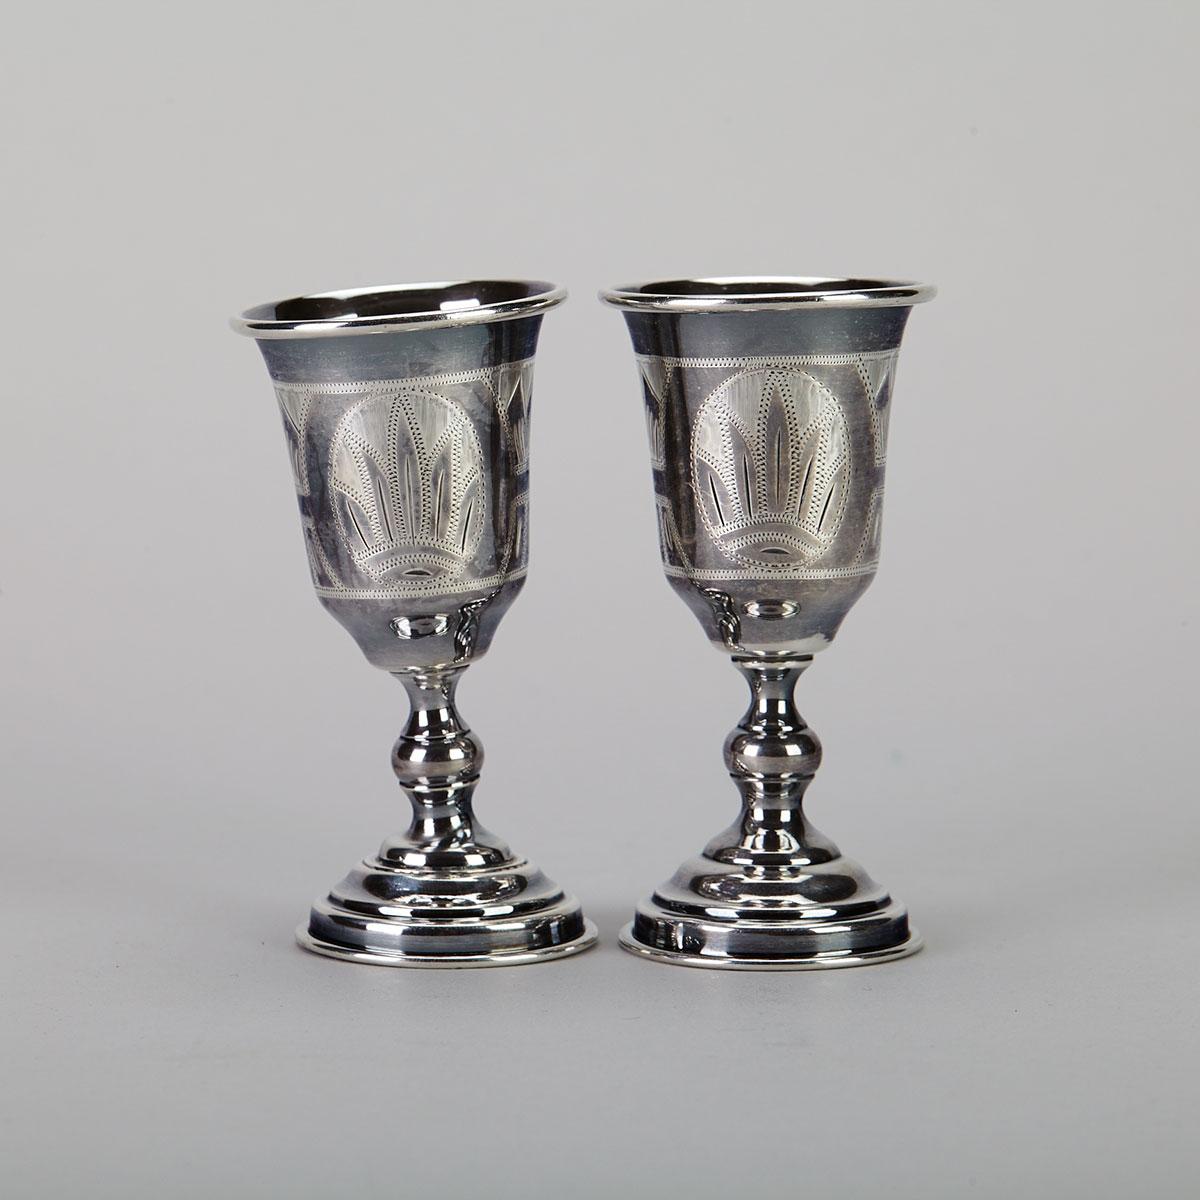 Pair of Russian Silver Kiddush Cups, c.1914